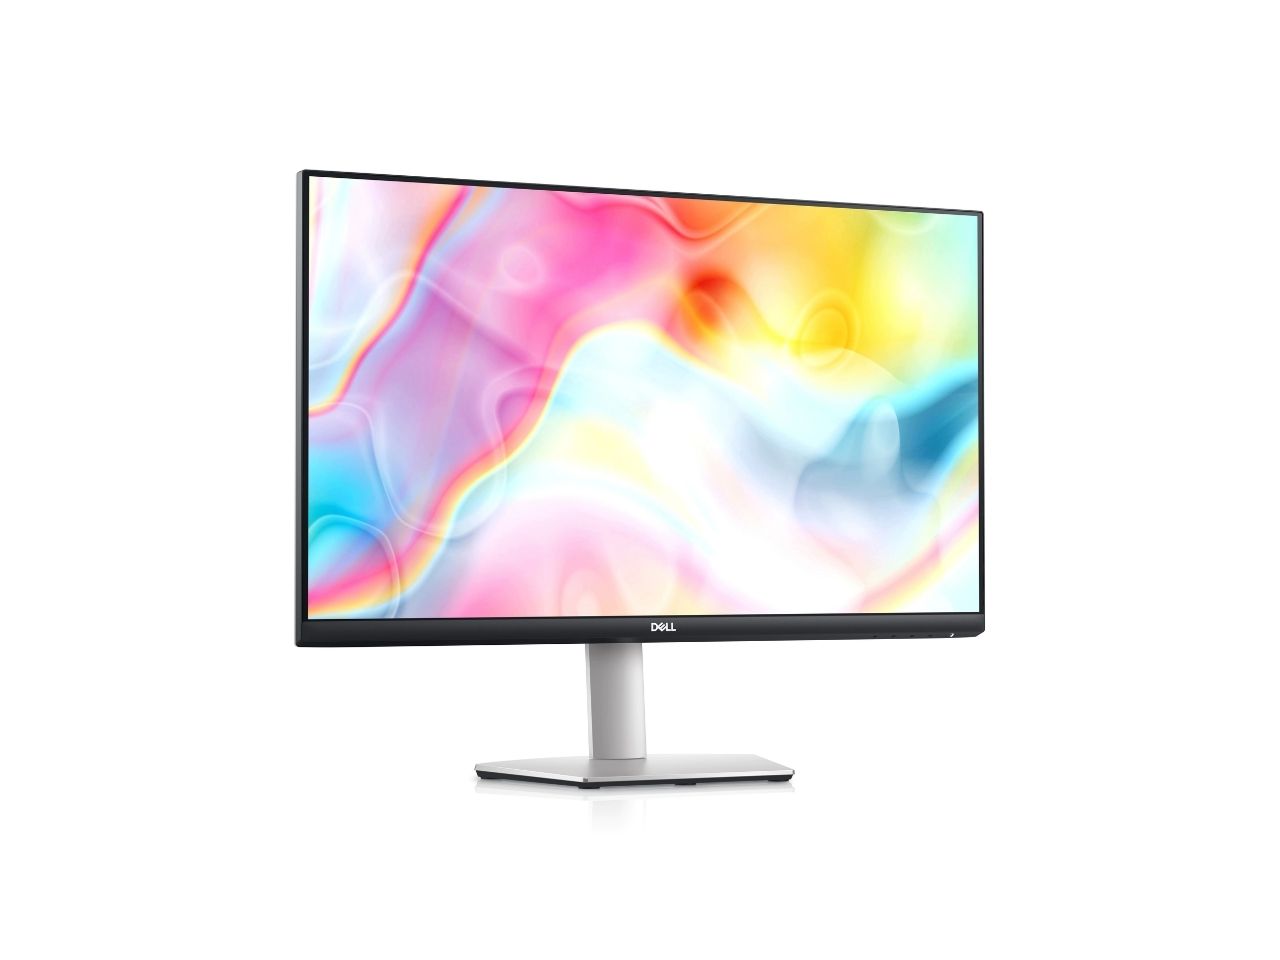 Dell S2722QC monitor on white background.